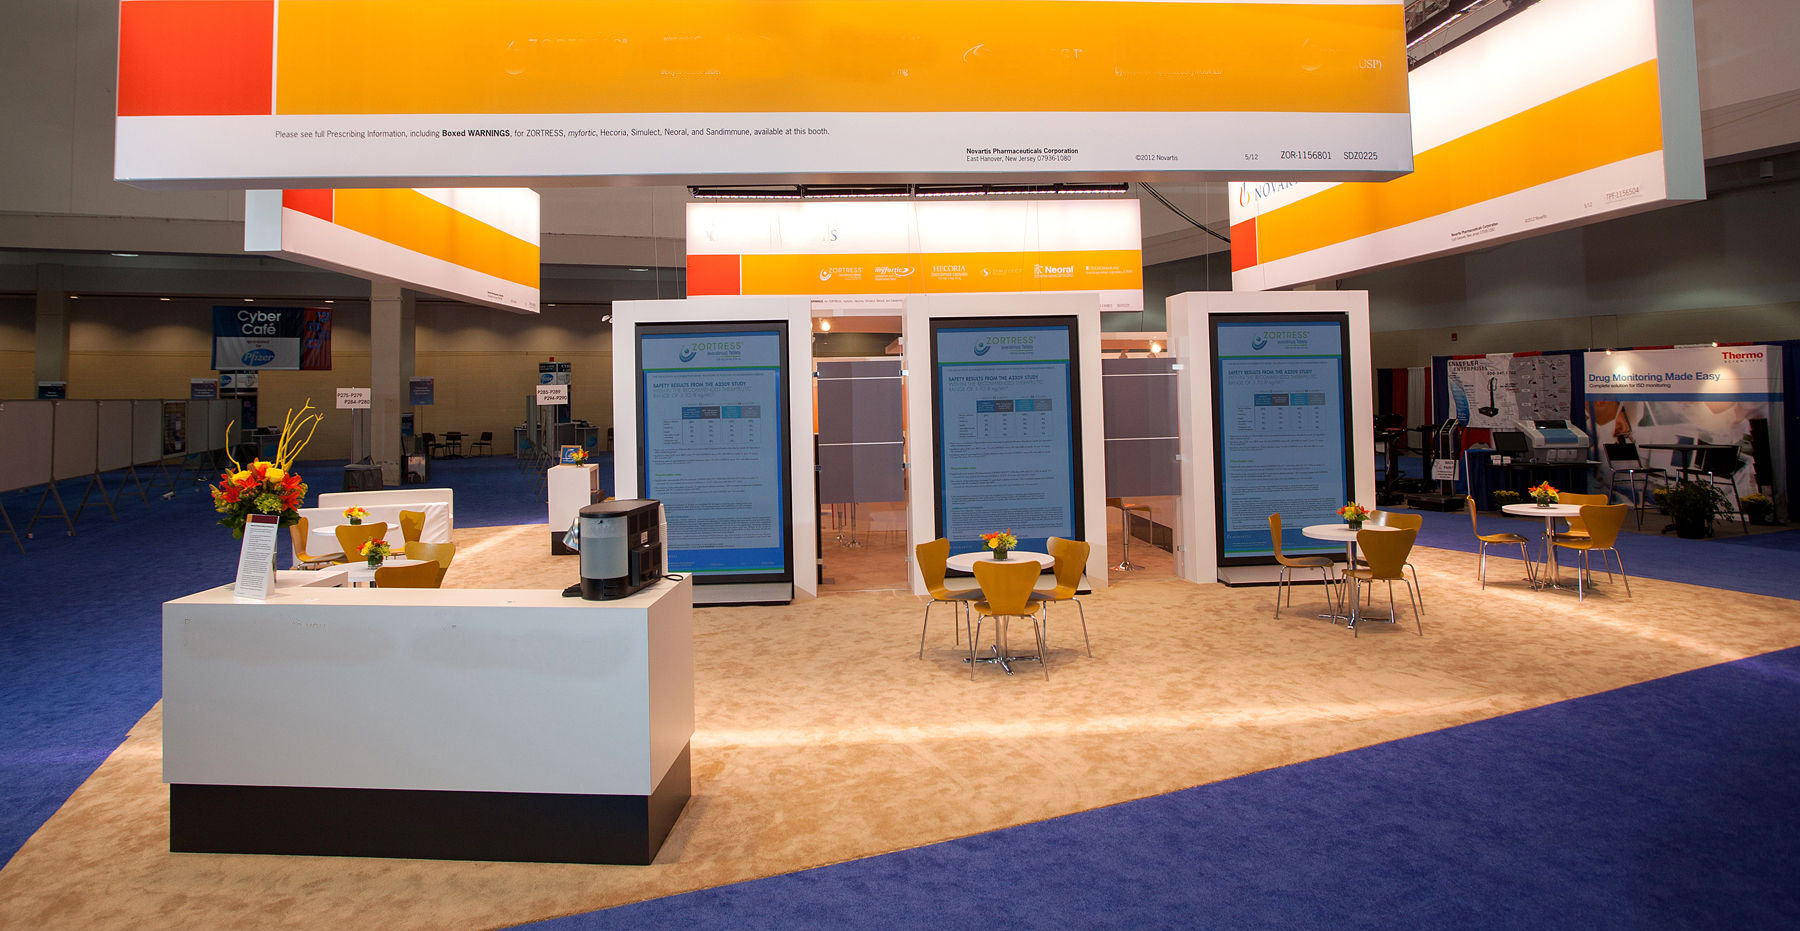 Conference and Trade Show Booth